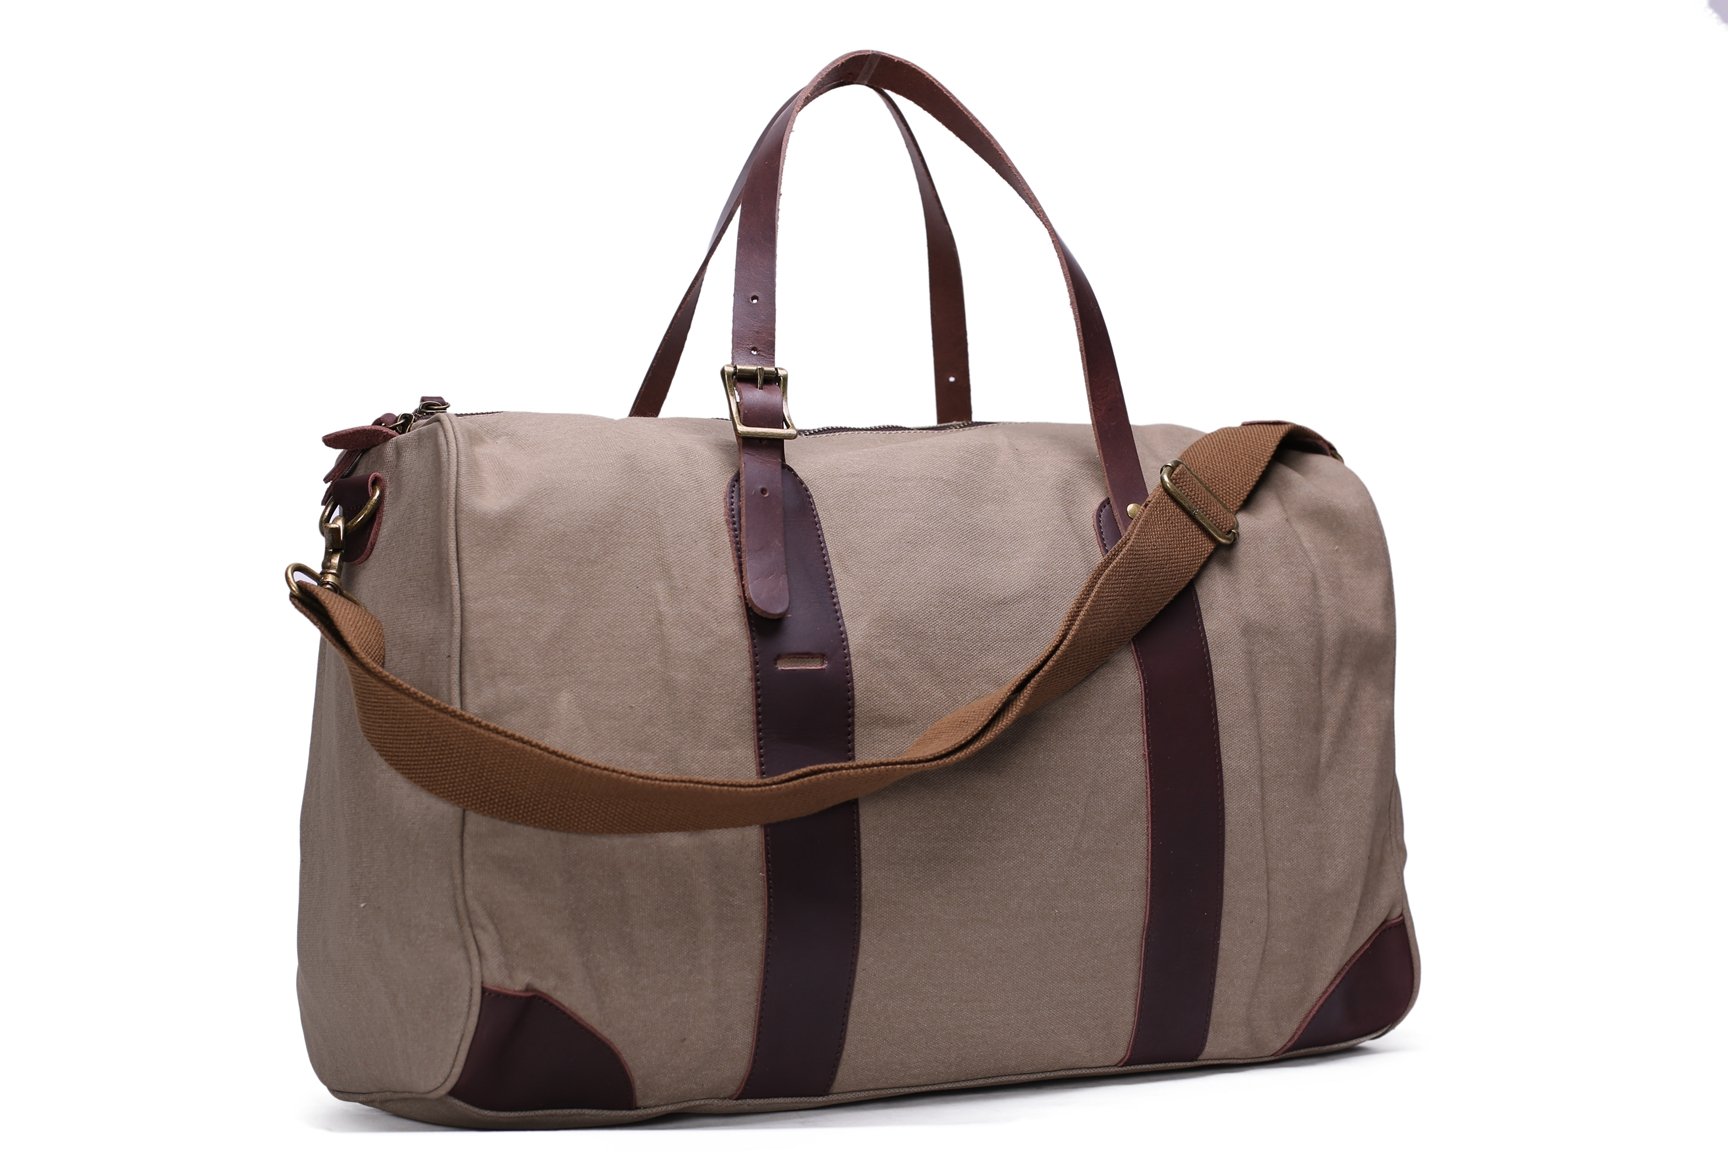 Waxed Canvas Travel Bag Duffle Bag Holdall Weekender Bag with Leather